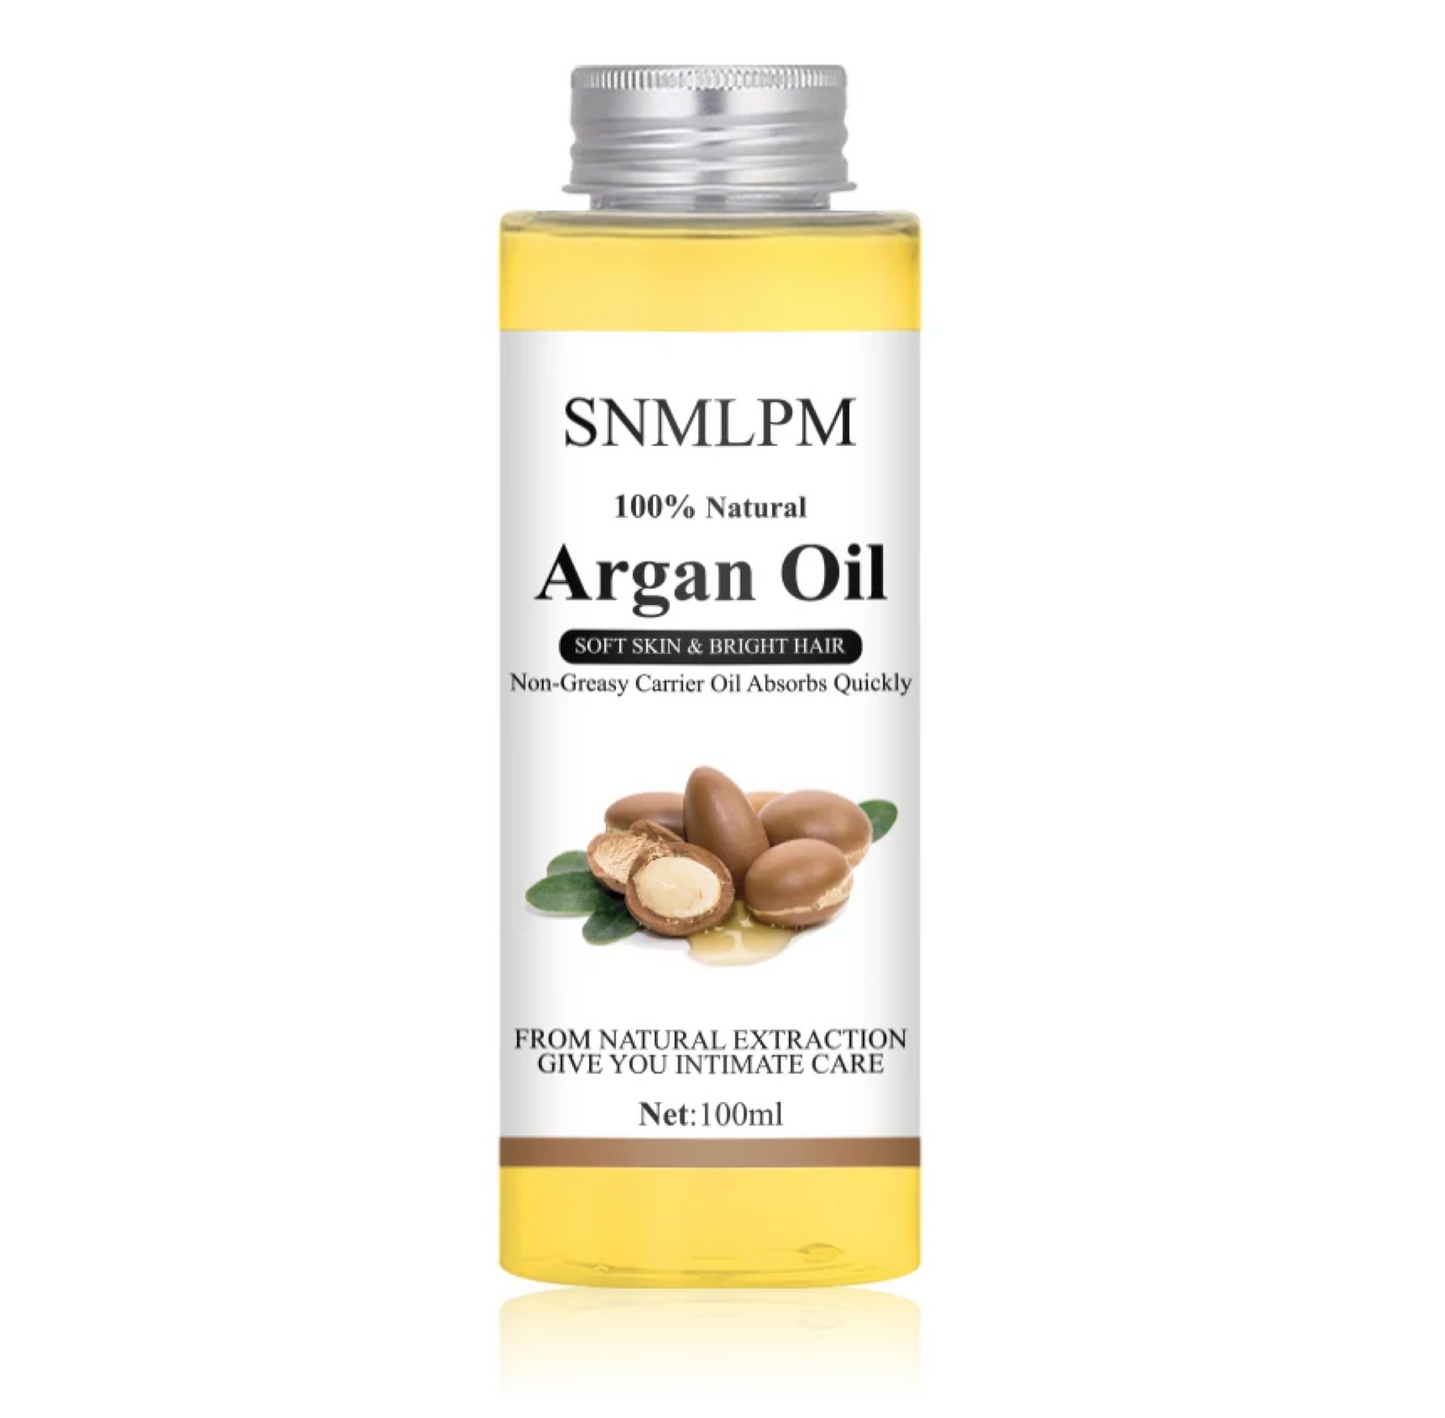 100% Natural and Organic Argan Oil Of Morocco 100ml